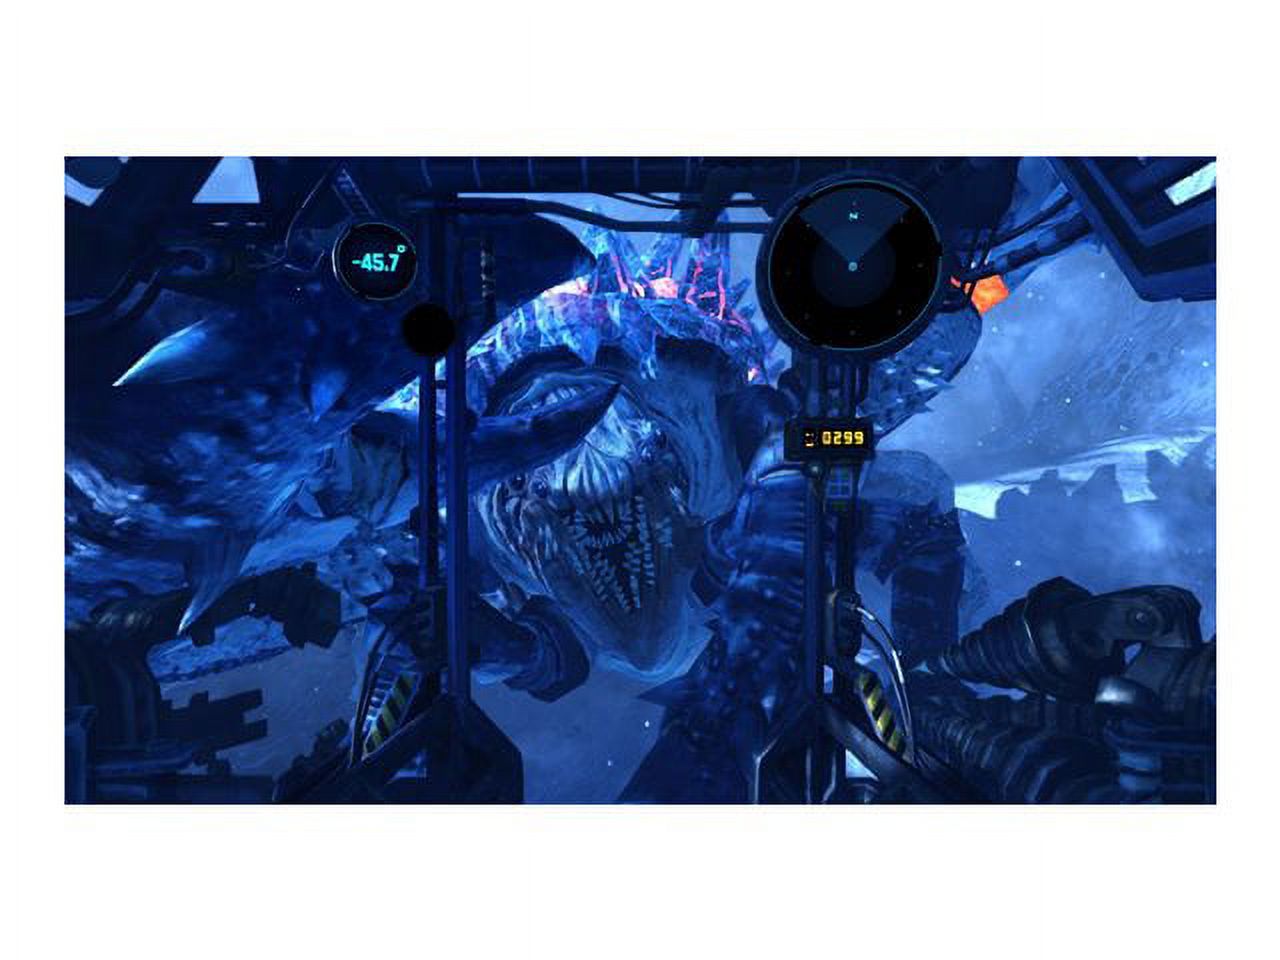 Lost Planet 3 - Xbox 360 (33039) - image 4 of 54